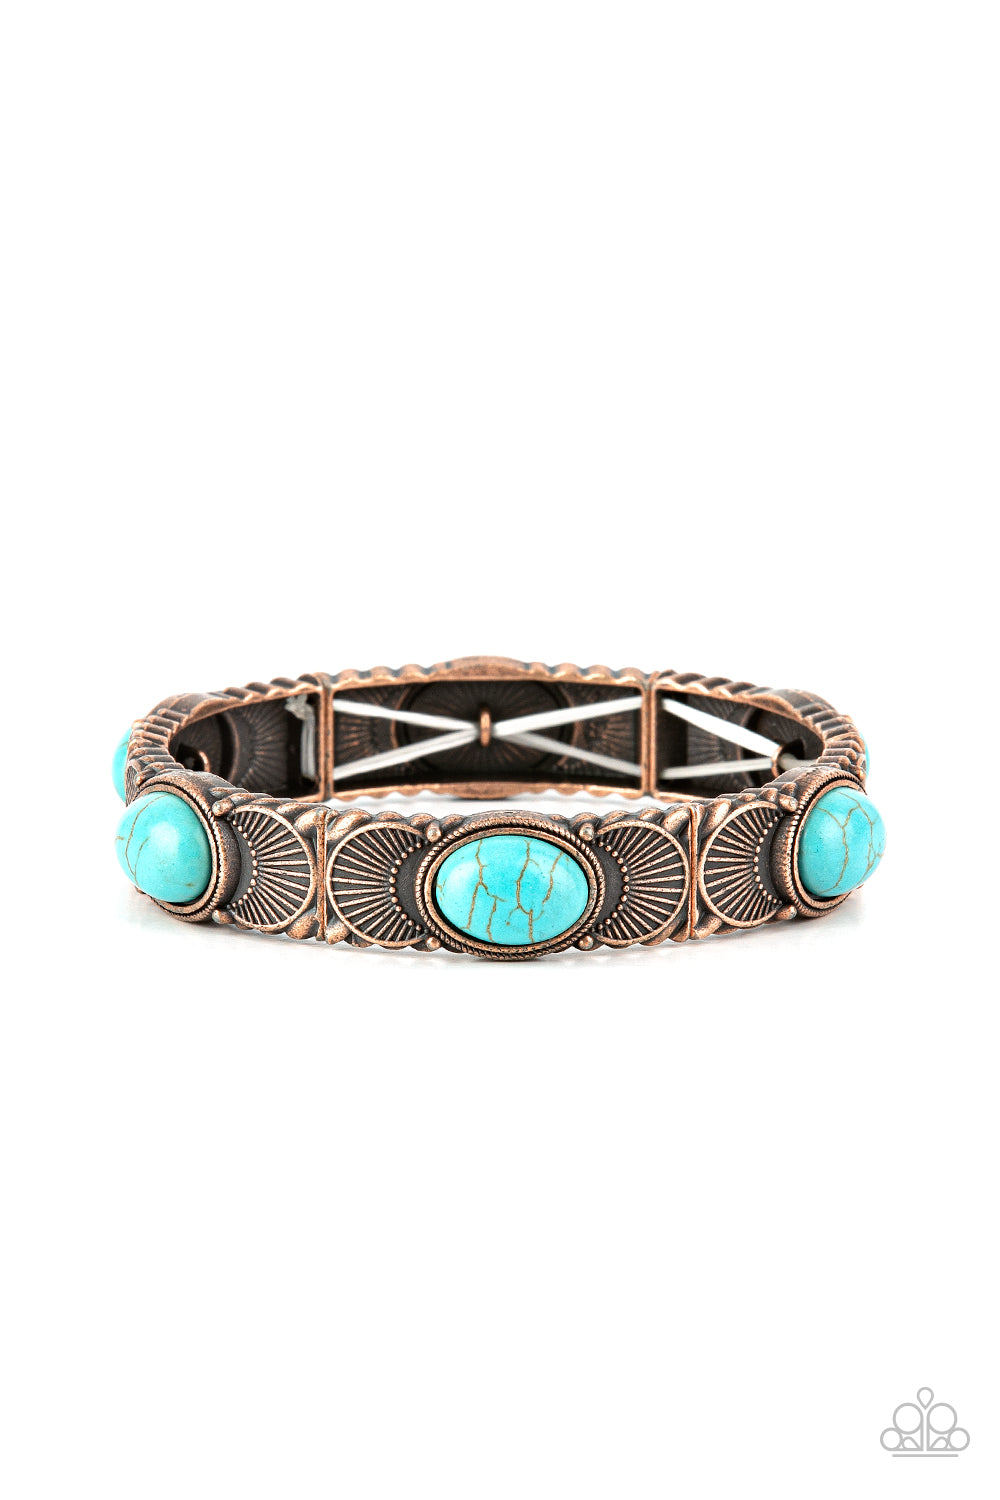 Desert Skyline - Copper and Turquoise Bracelet - Paparazzi Accessories - Flanked by copper half moon accents, turquoise stone dotted copper frames are threaded along stretchy bands around the wrist for a rustic flair.